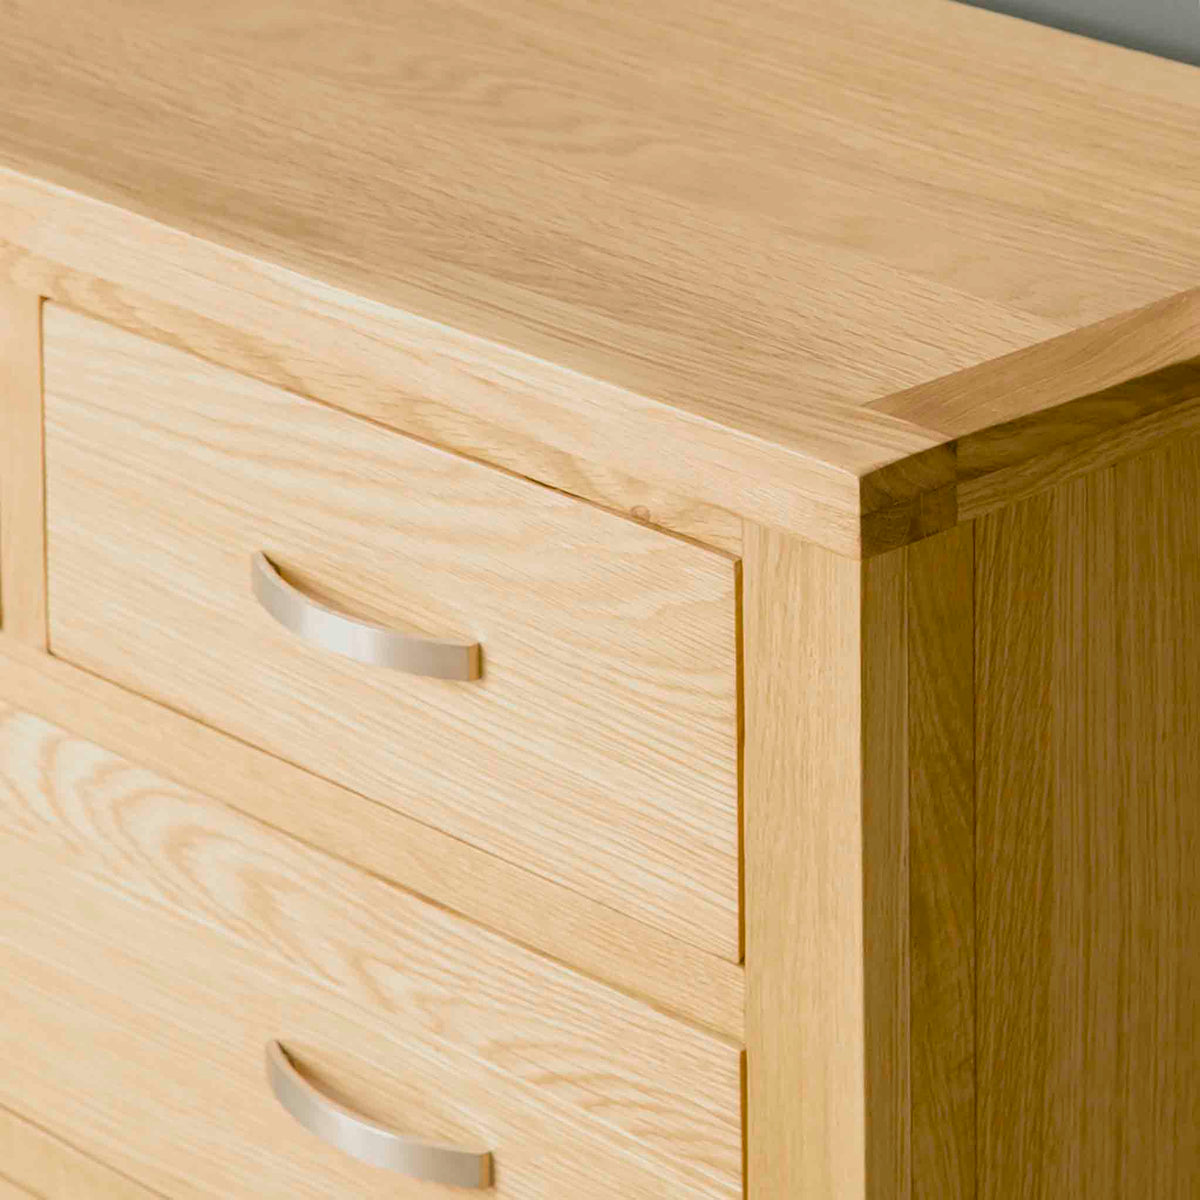 London Oak Large 6 Drawer Chest of Drawers - Close up of top corner